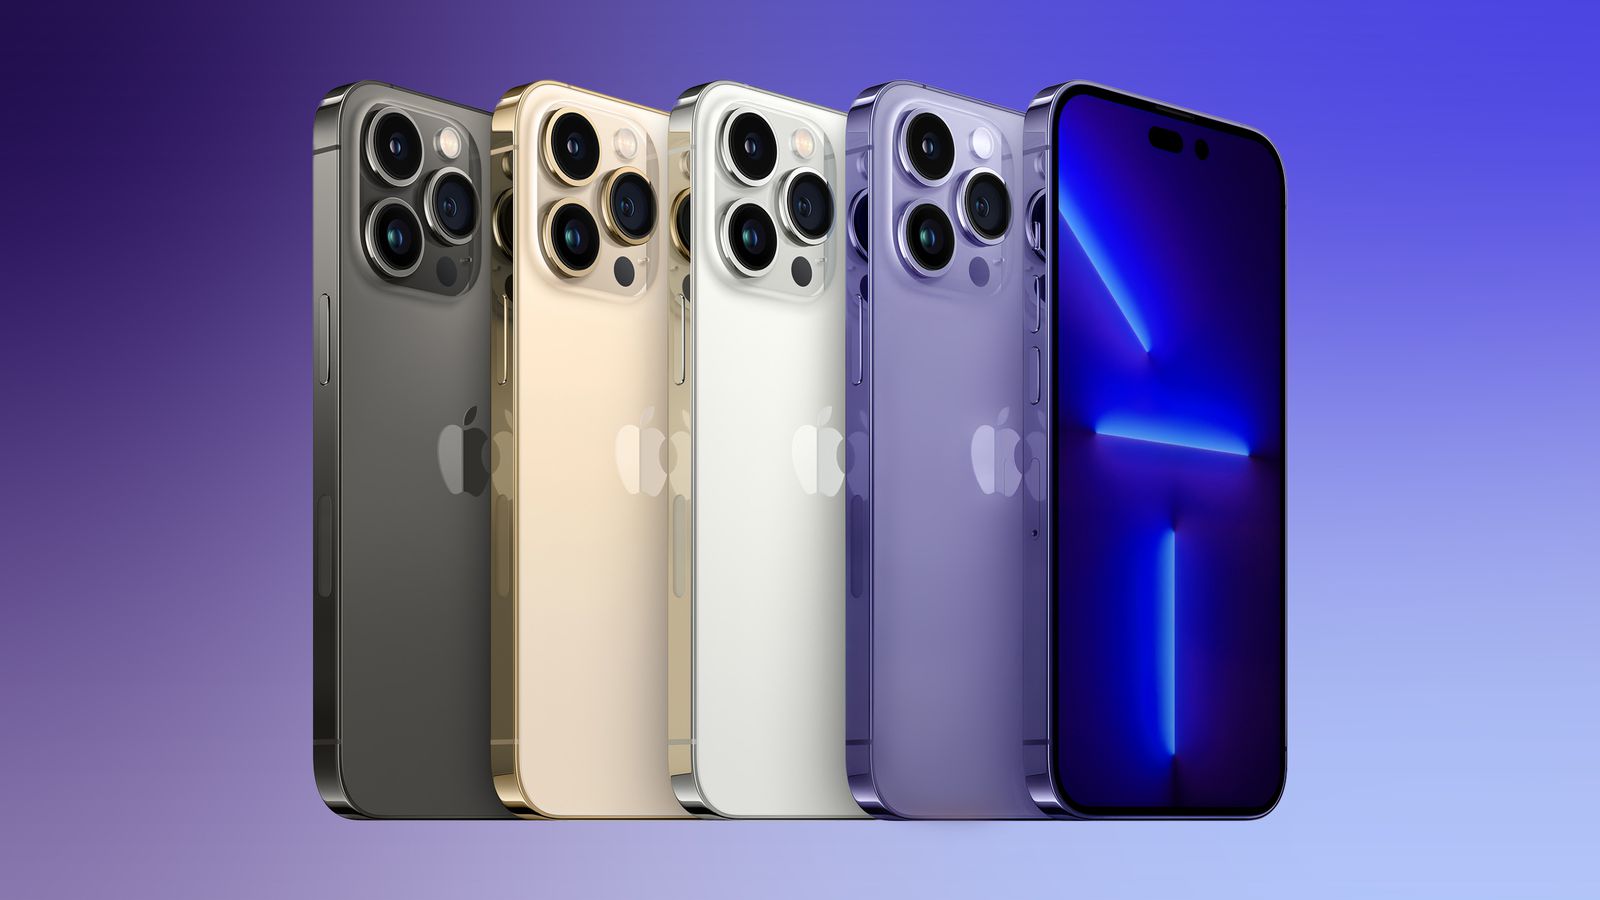 iPhone 14 Pro / Pro Max Could Get Faster 6GB LPDDR5 RAM